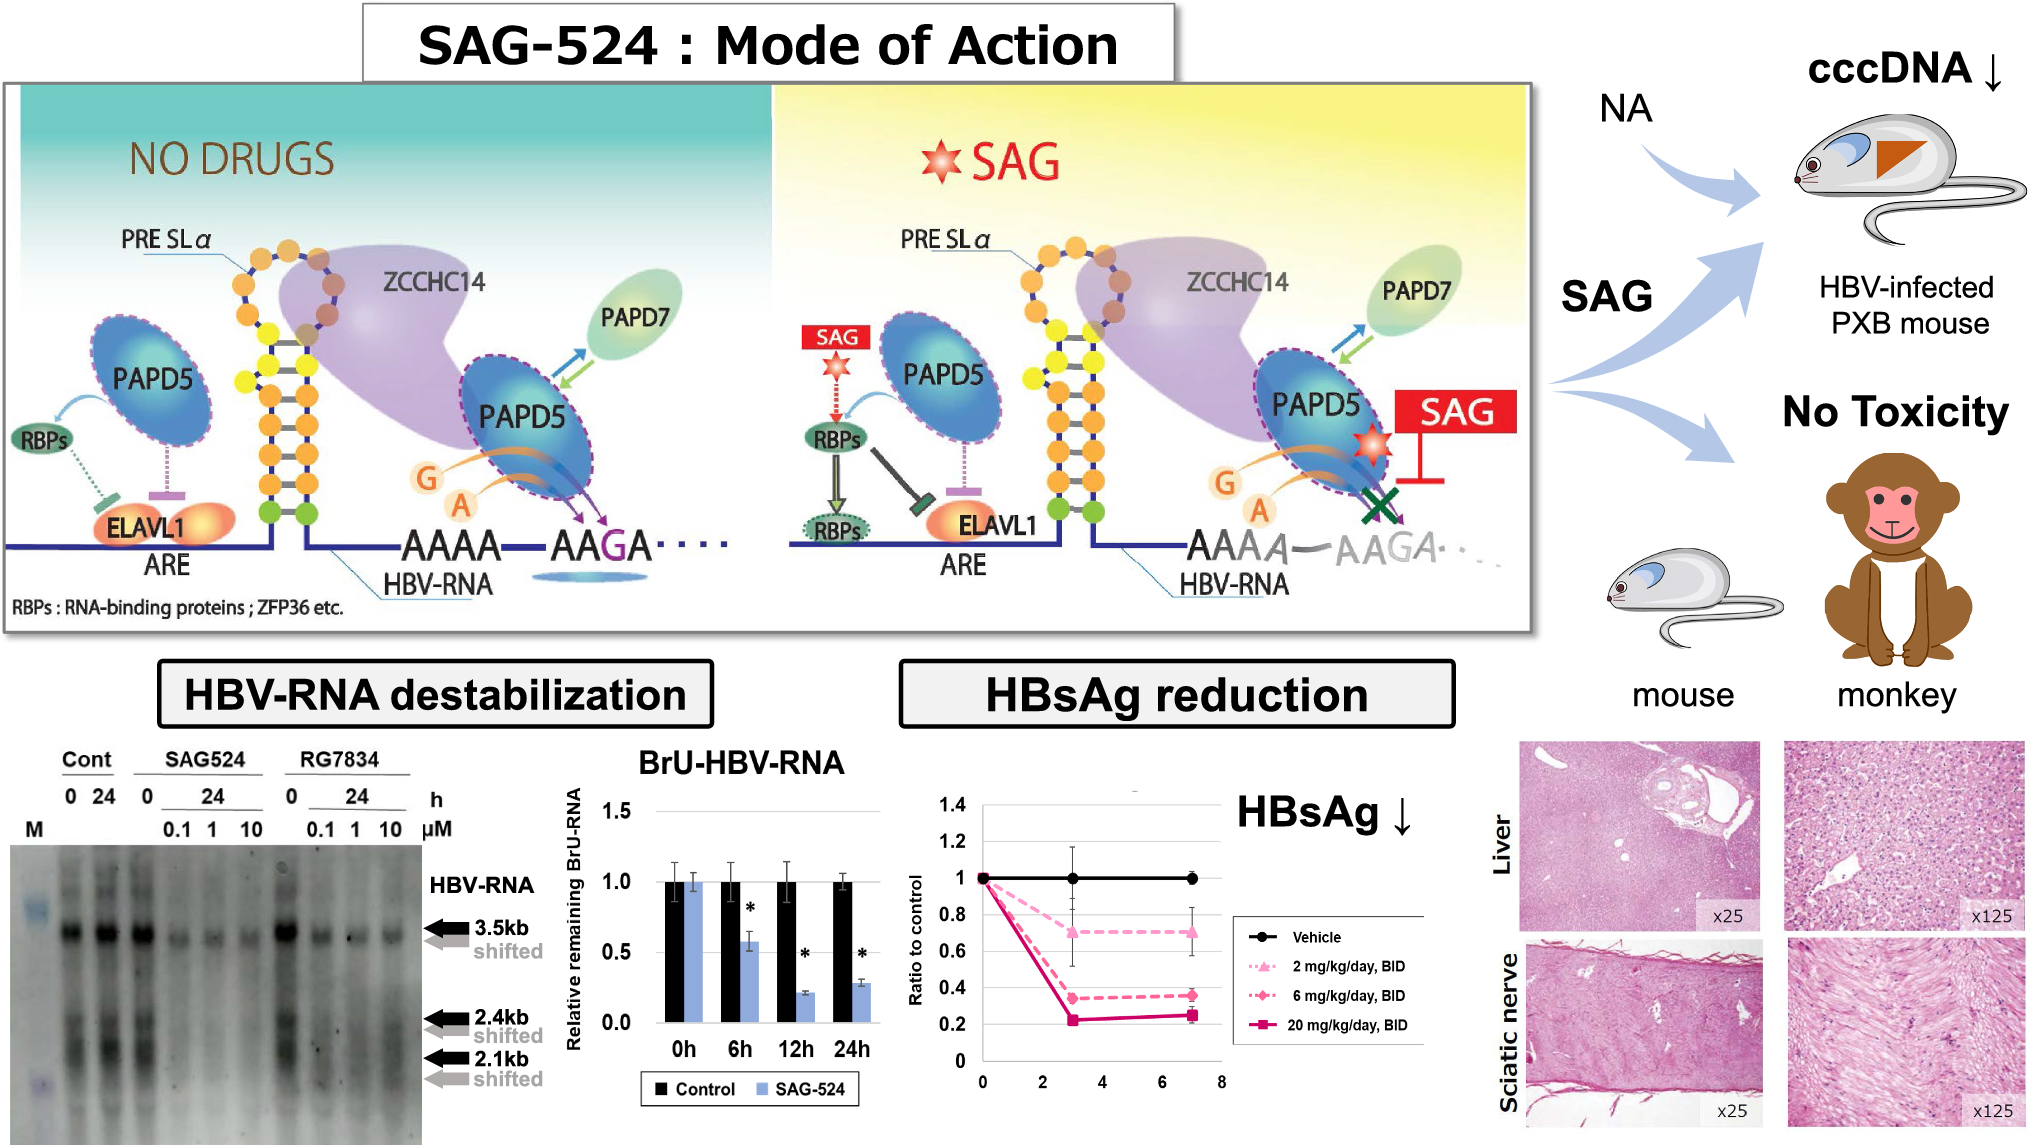 A novel, small anti-HBV compound reduces HBsAg and HBV-DNA by destabilizing HBV-RNA